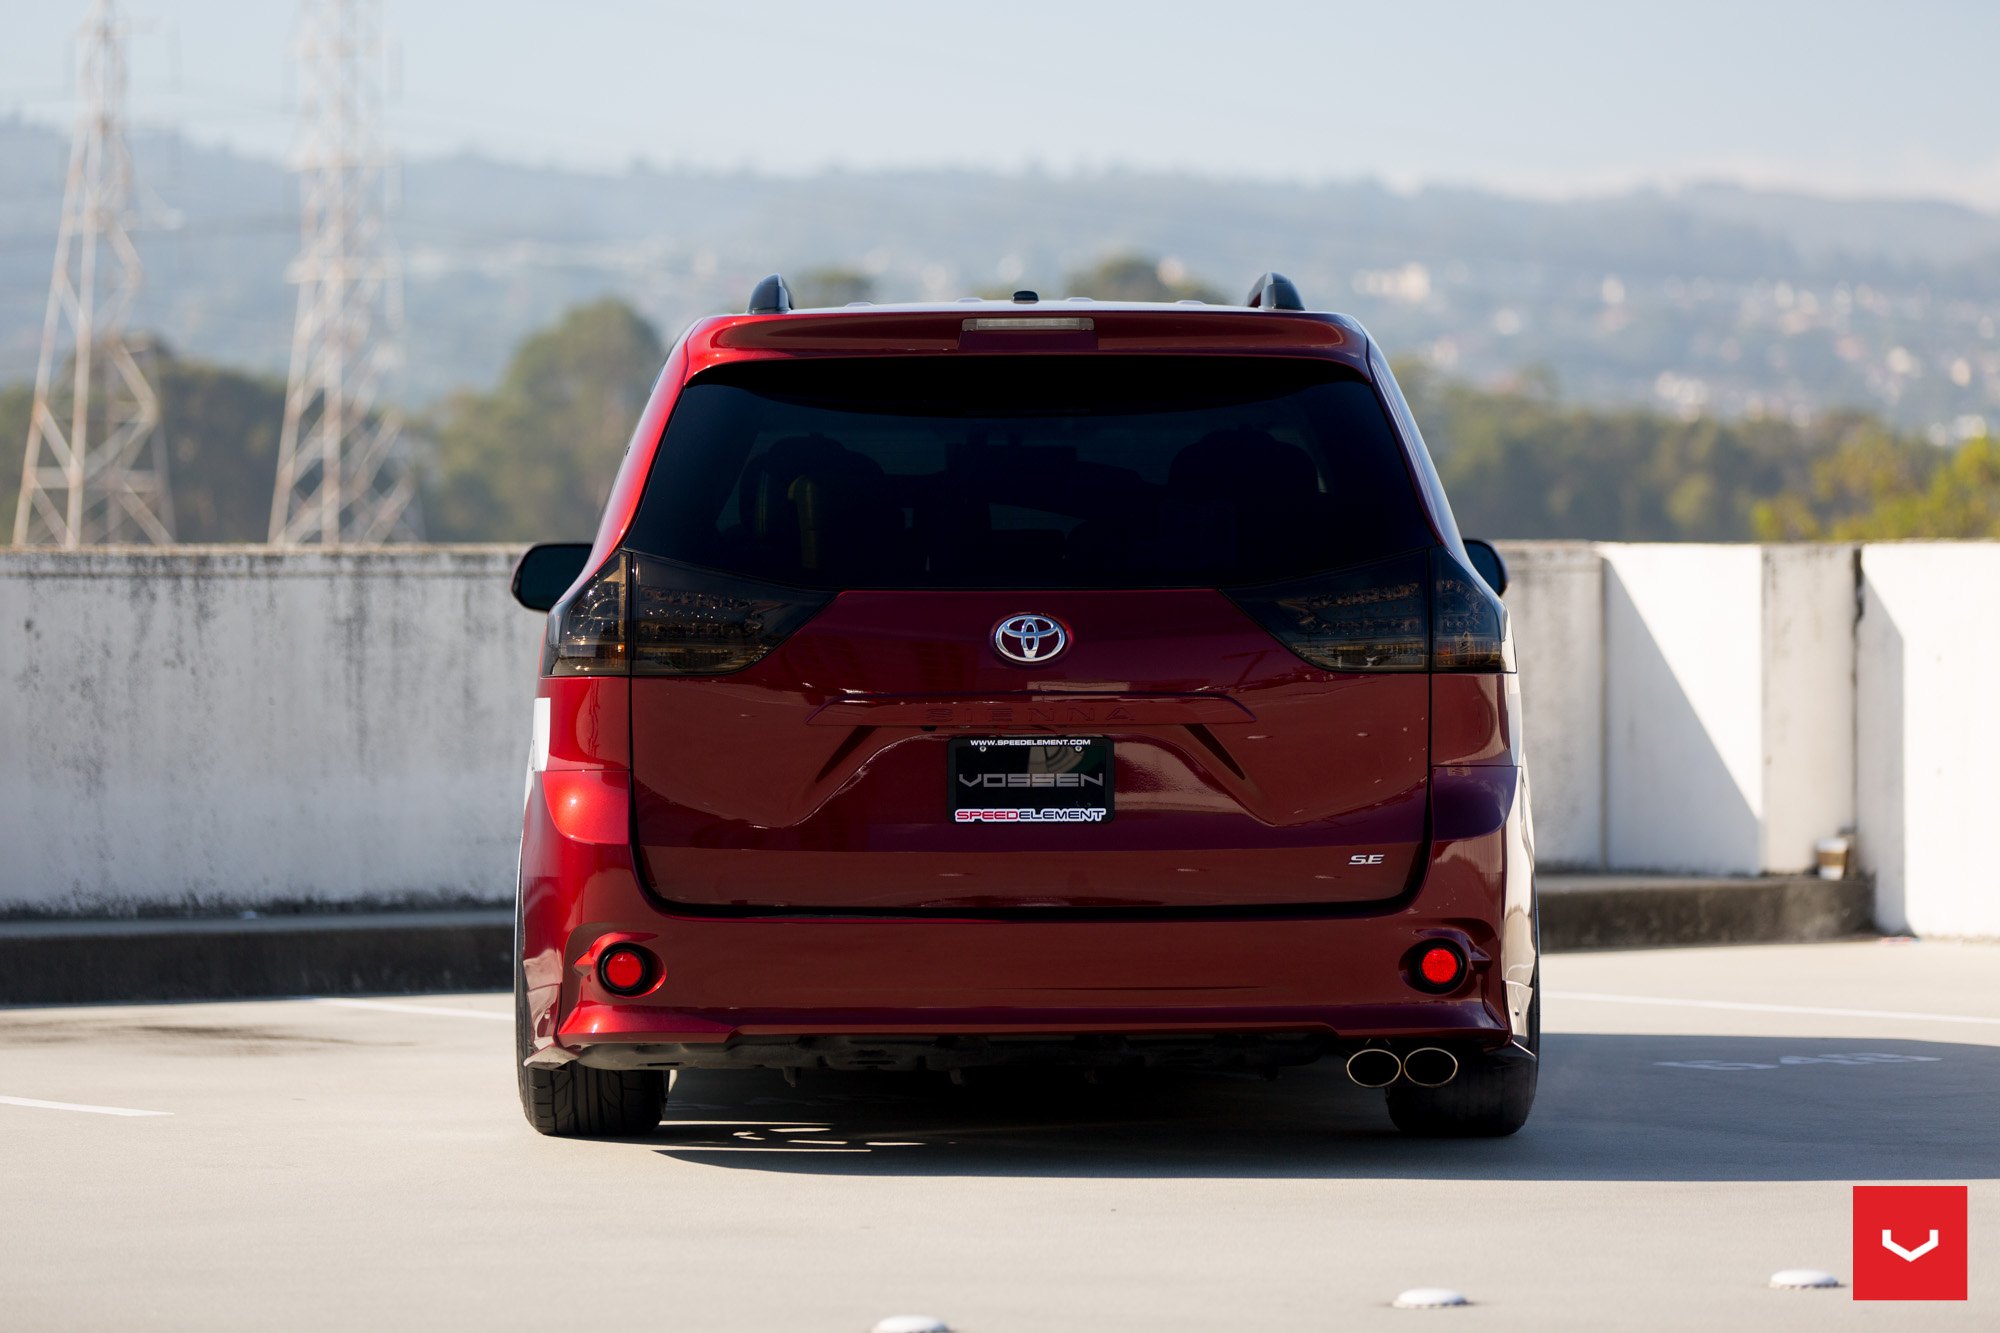 Roofline Spoiler with Light on Red Toyota Sienna - Photo by Vossen